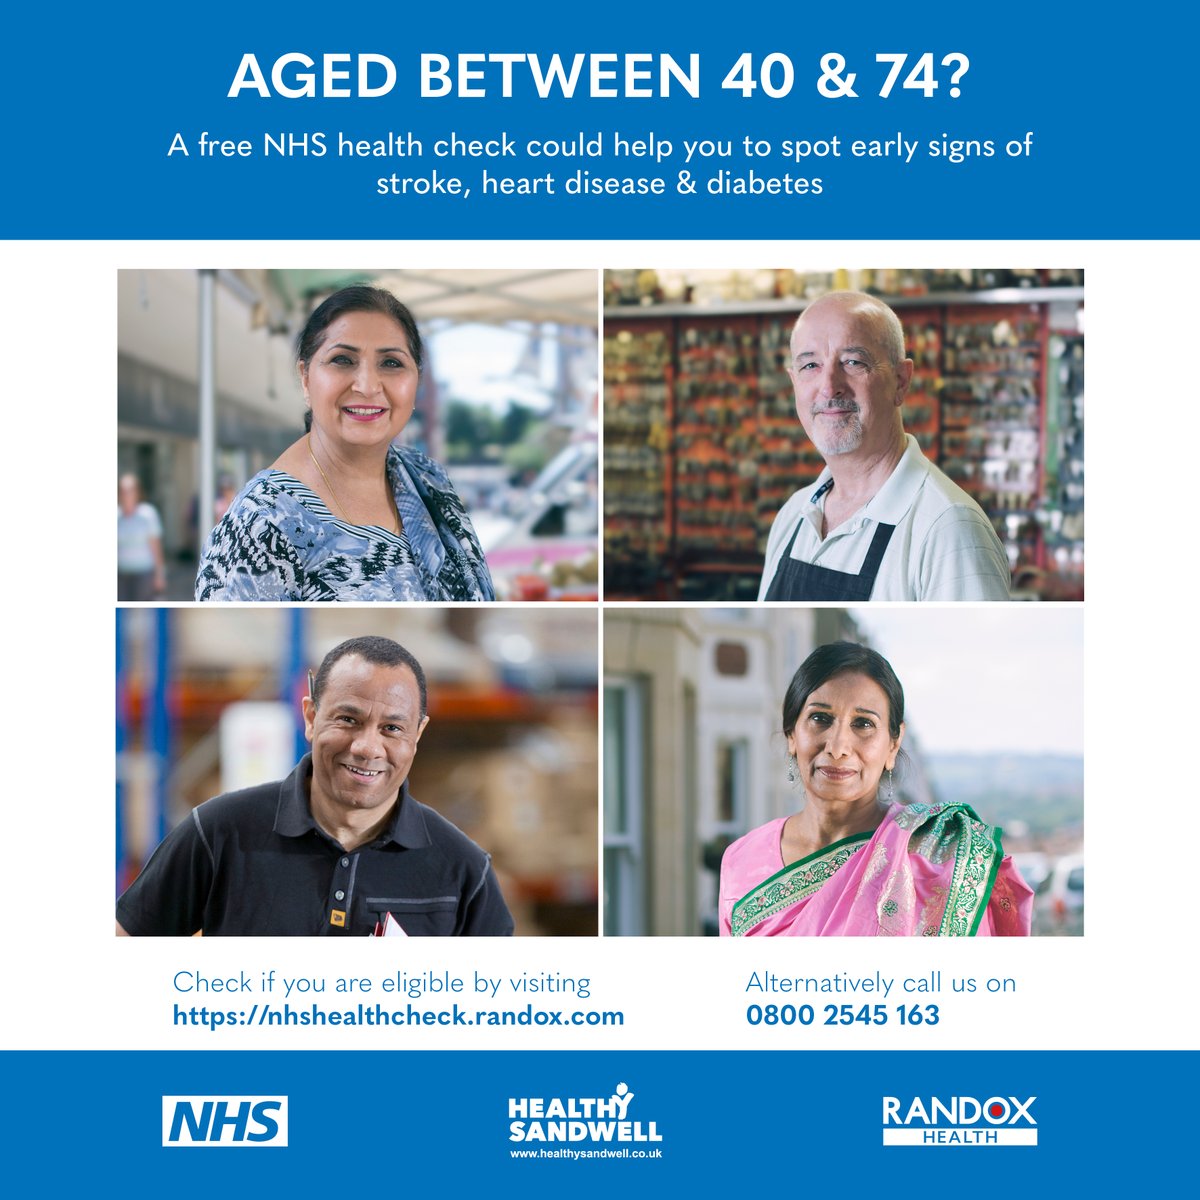 There are free NHS Health Checks taking place for those aged between 40 and 74 who do not have a pre-existing health condition. To check your eligibility, visit: nhshealthcheck.randox.com/eligibility/ To book your place, visit: nhshealthcheck.randox.com